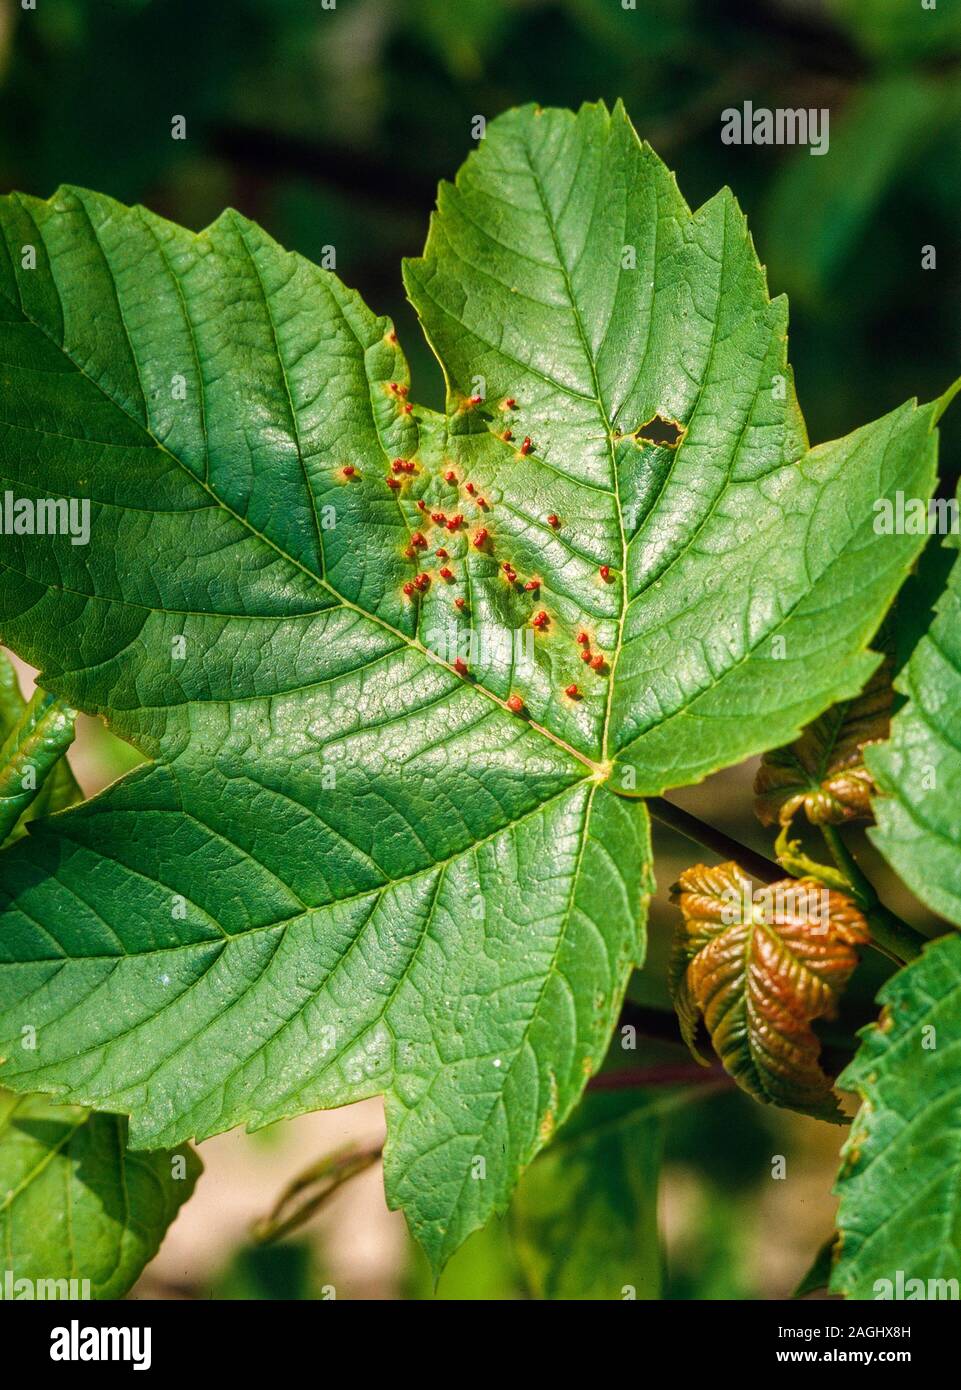 Sycamore / maple pimple galls caused by mites, Aceria spp. Stock Photo